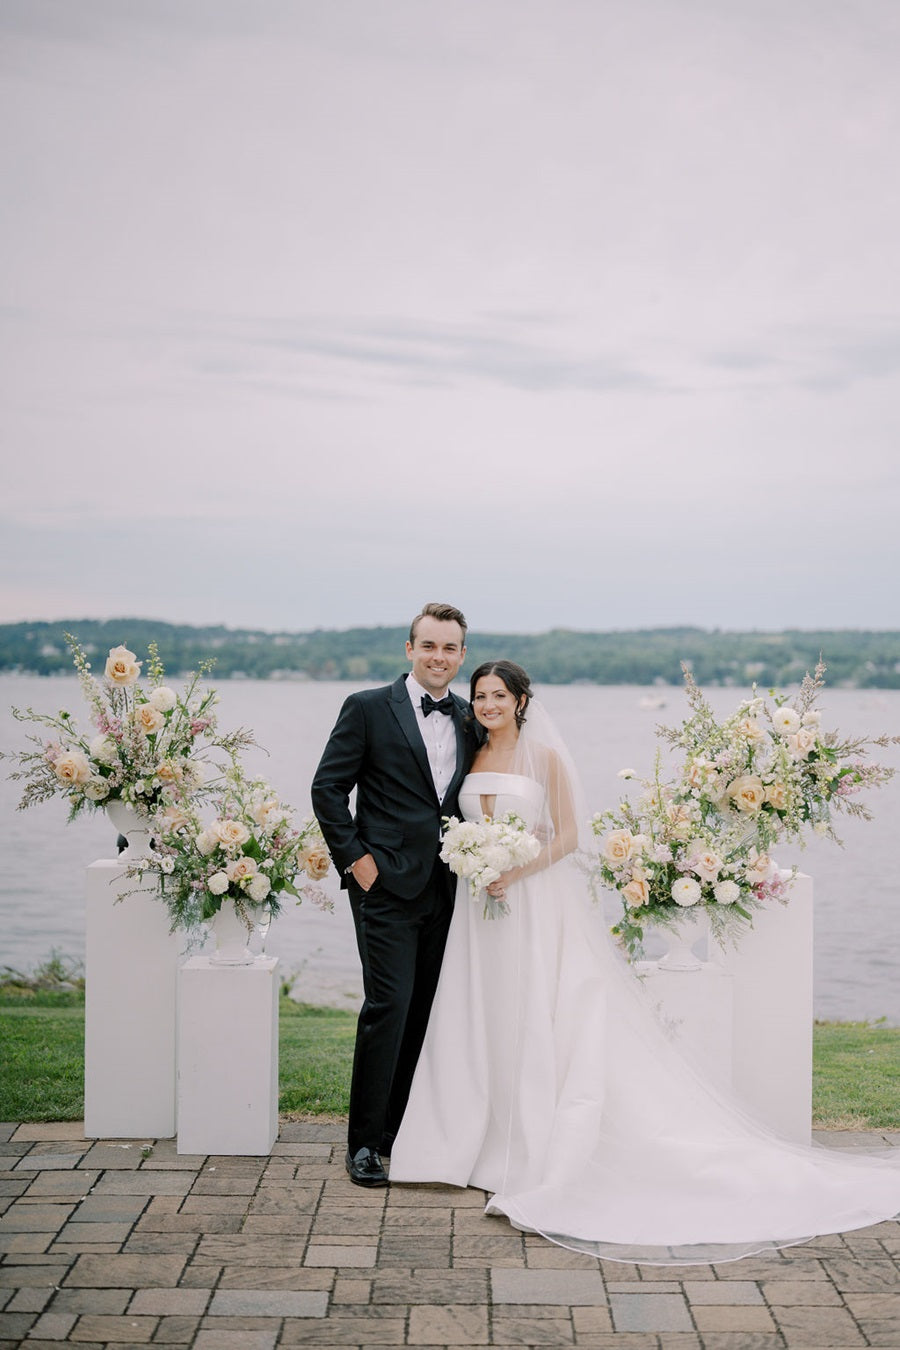 Bride and groom stand in front of the floral arrangements. Bride hold a bouquet made of all white flowers.